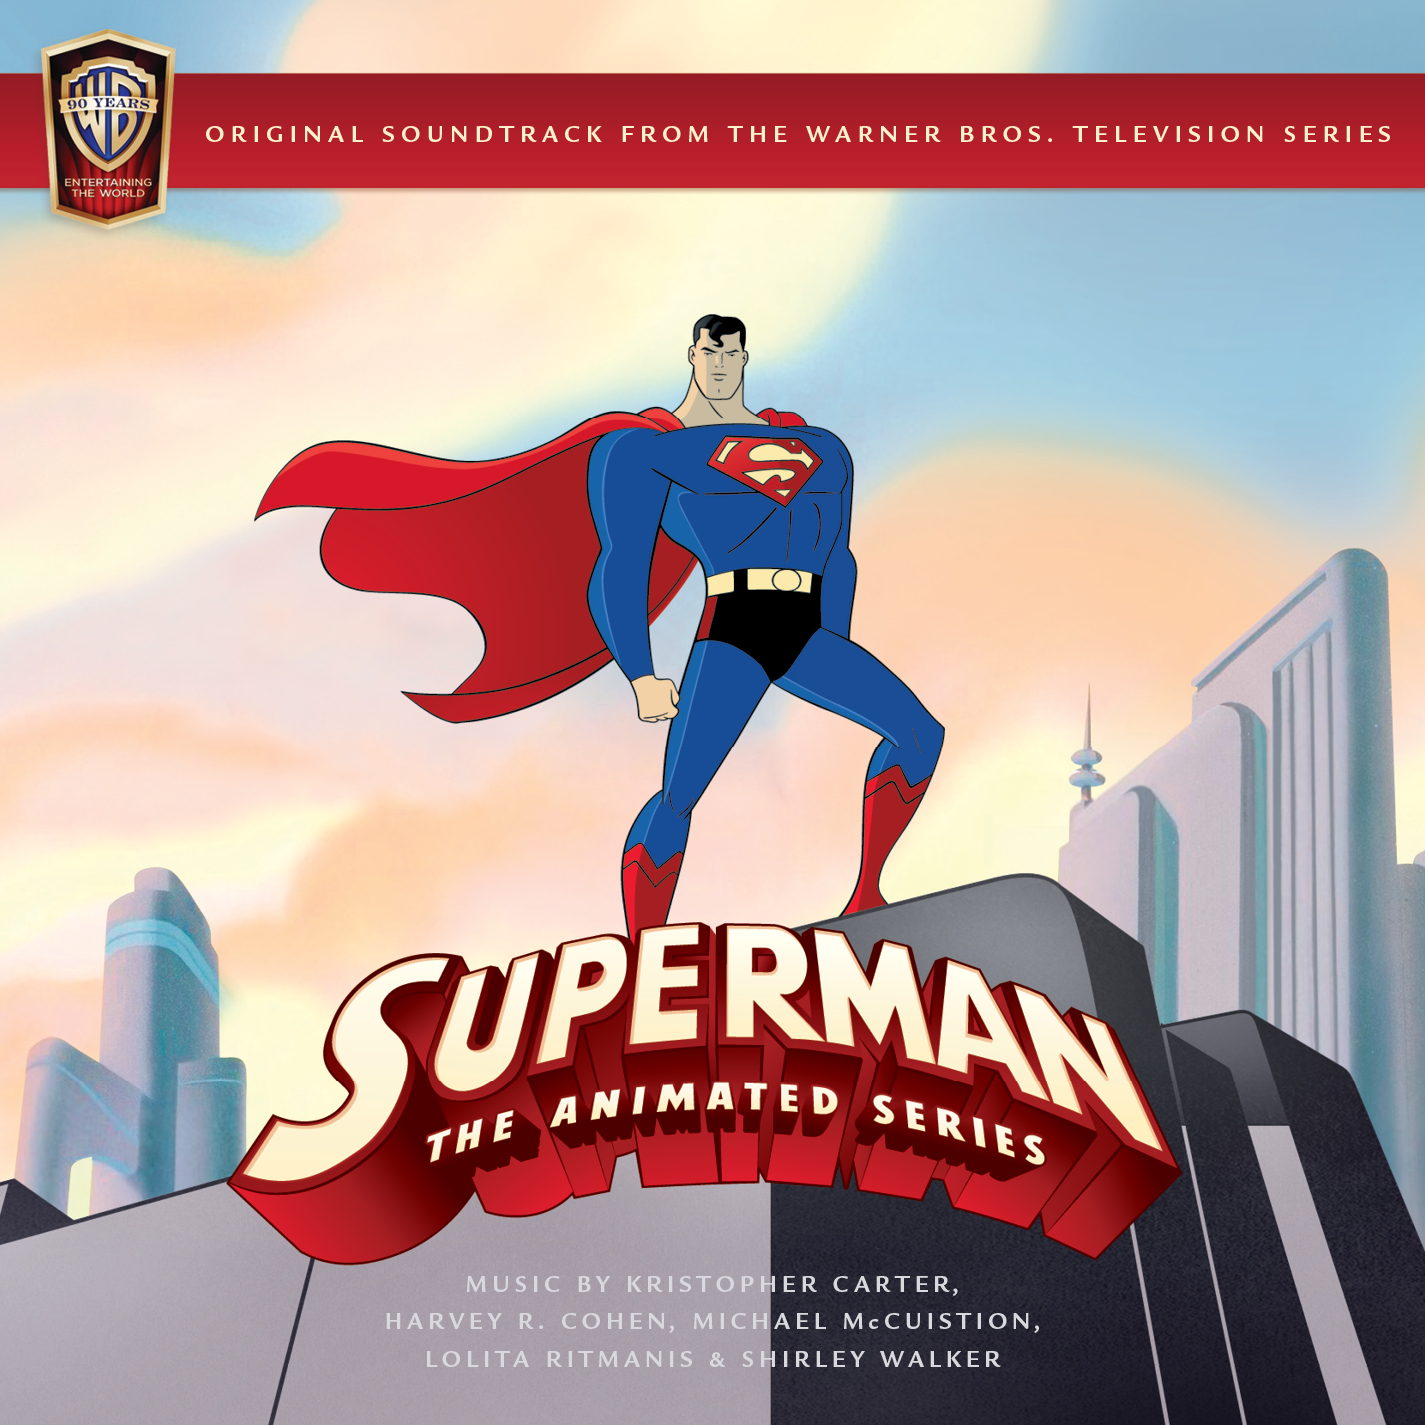 From The Archives: Superman - The Animated Series — FILMS ON WAX